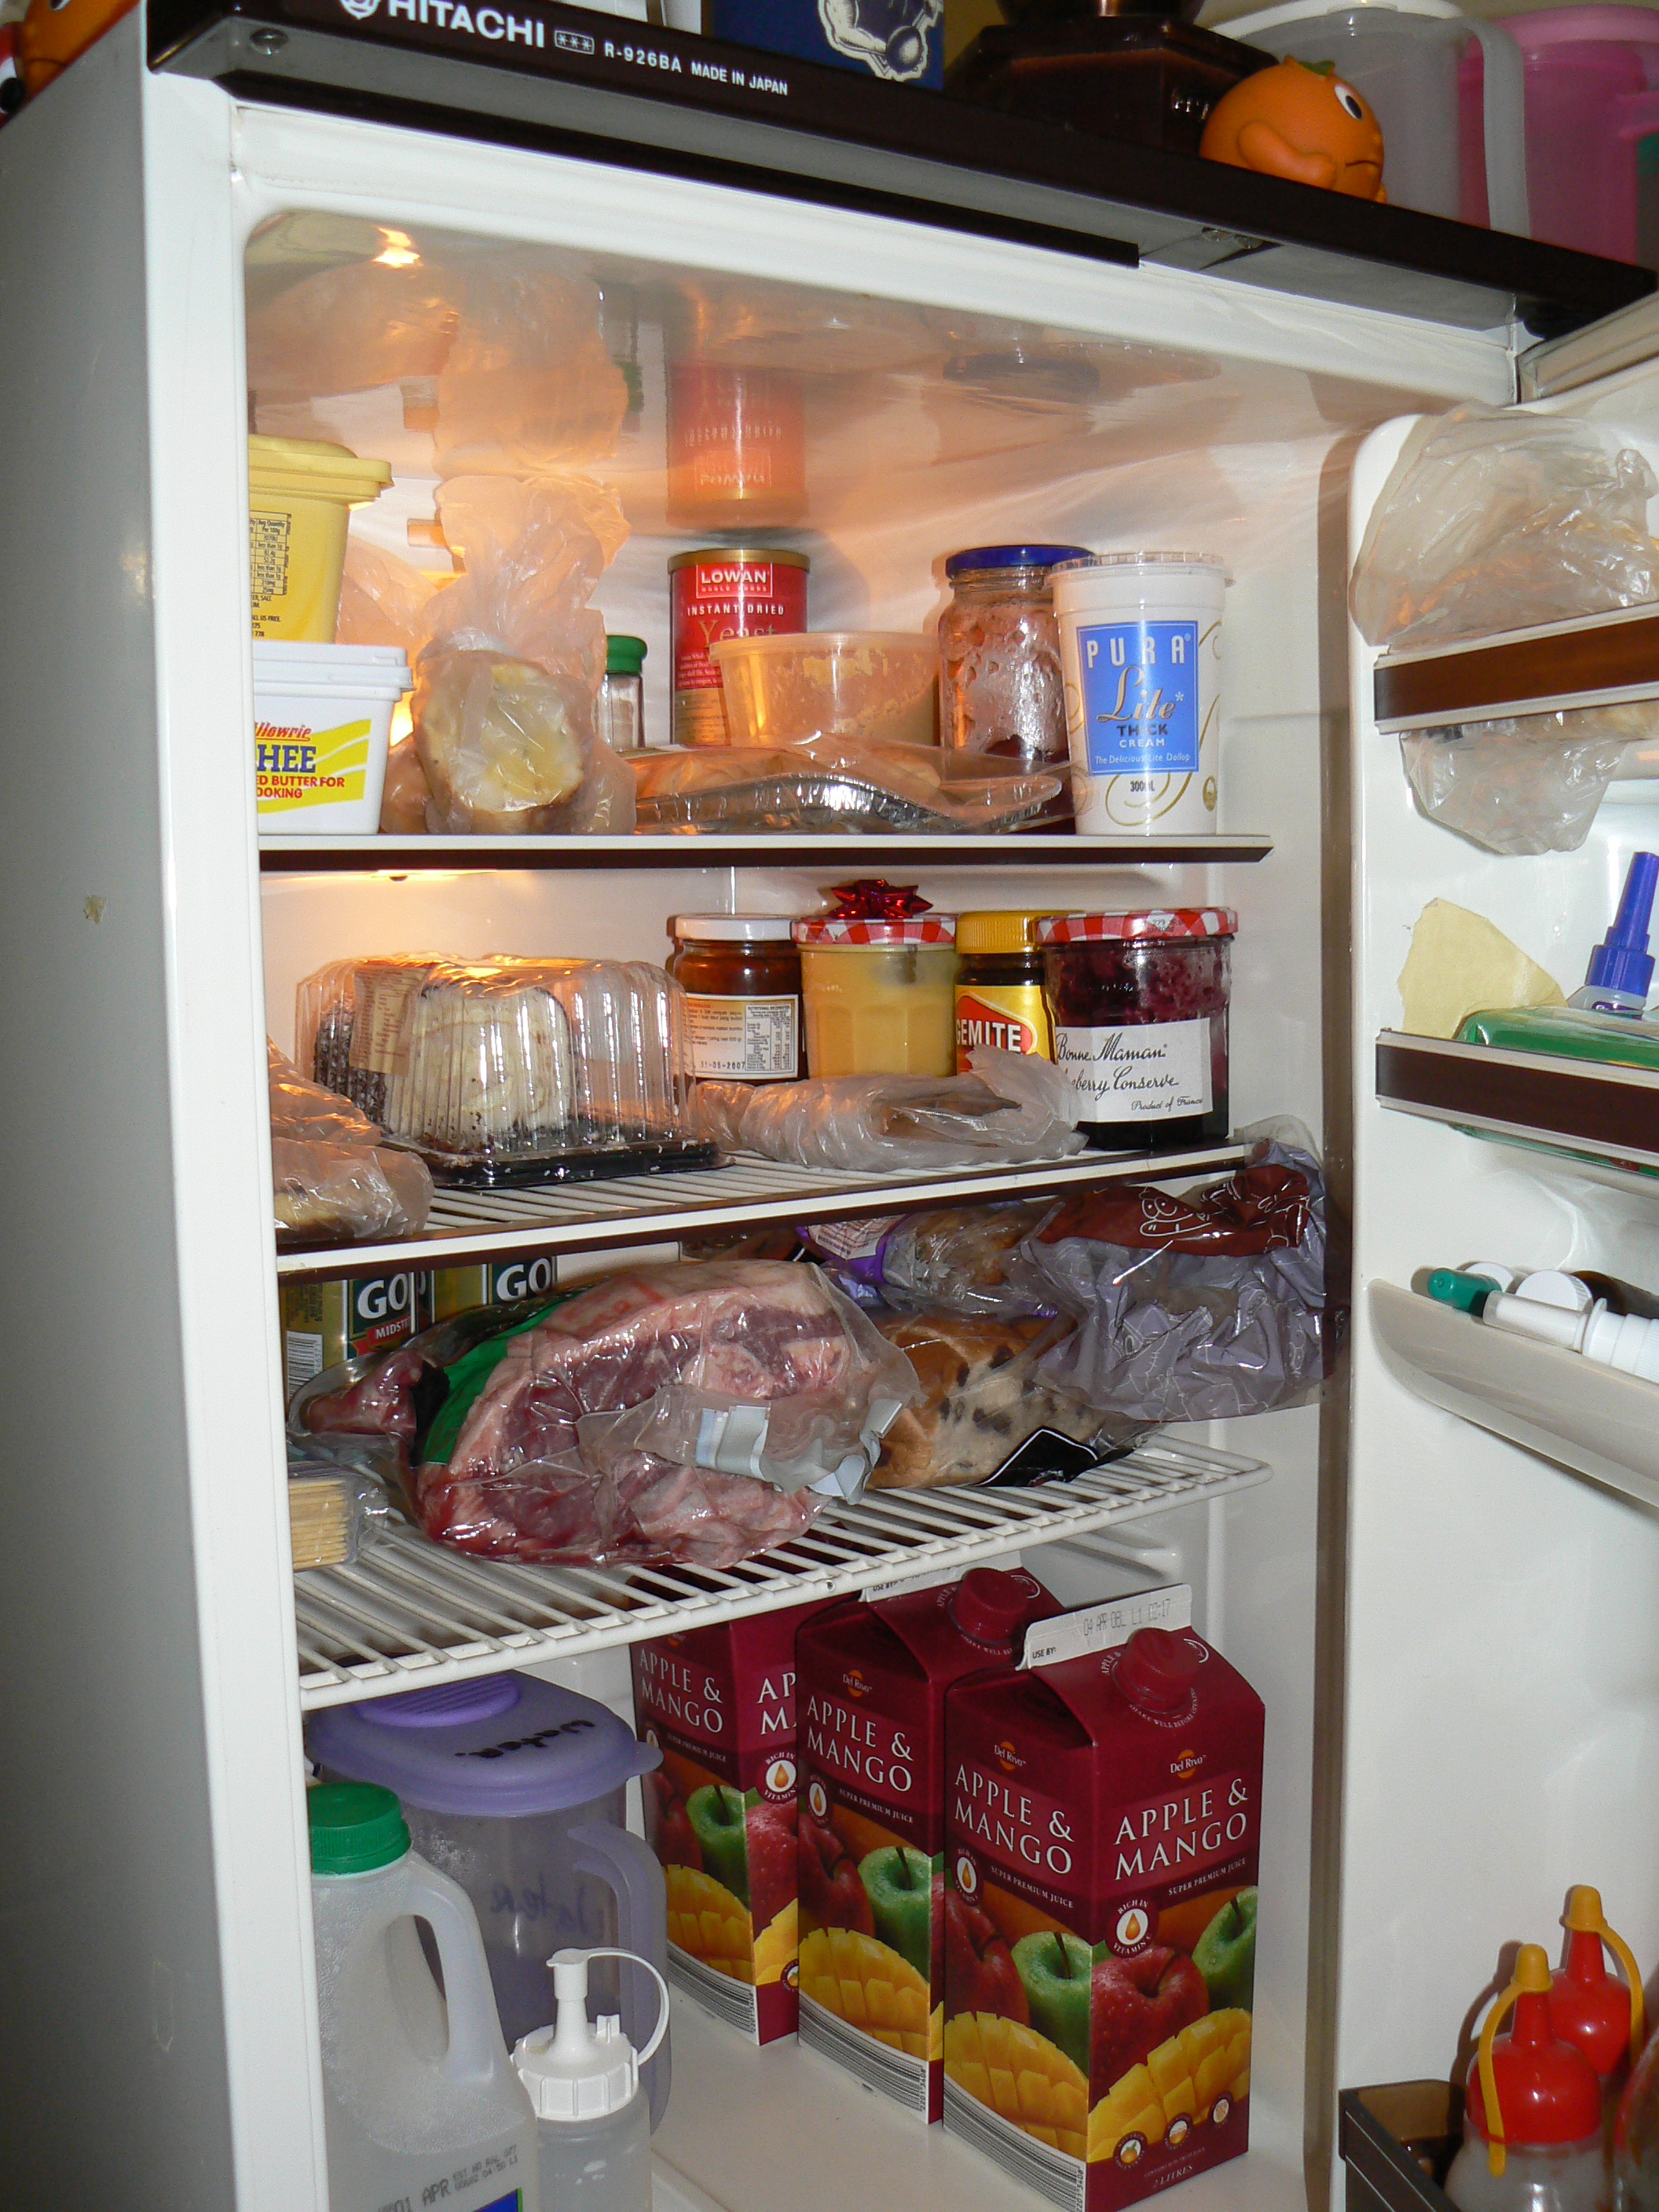 The fridge was open for about five minutes during Earth Hour. Despite the lovely glow, one must keep the food chilled.